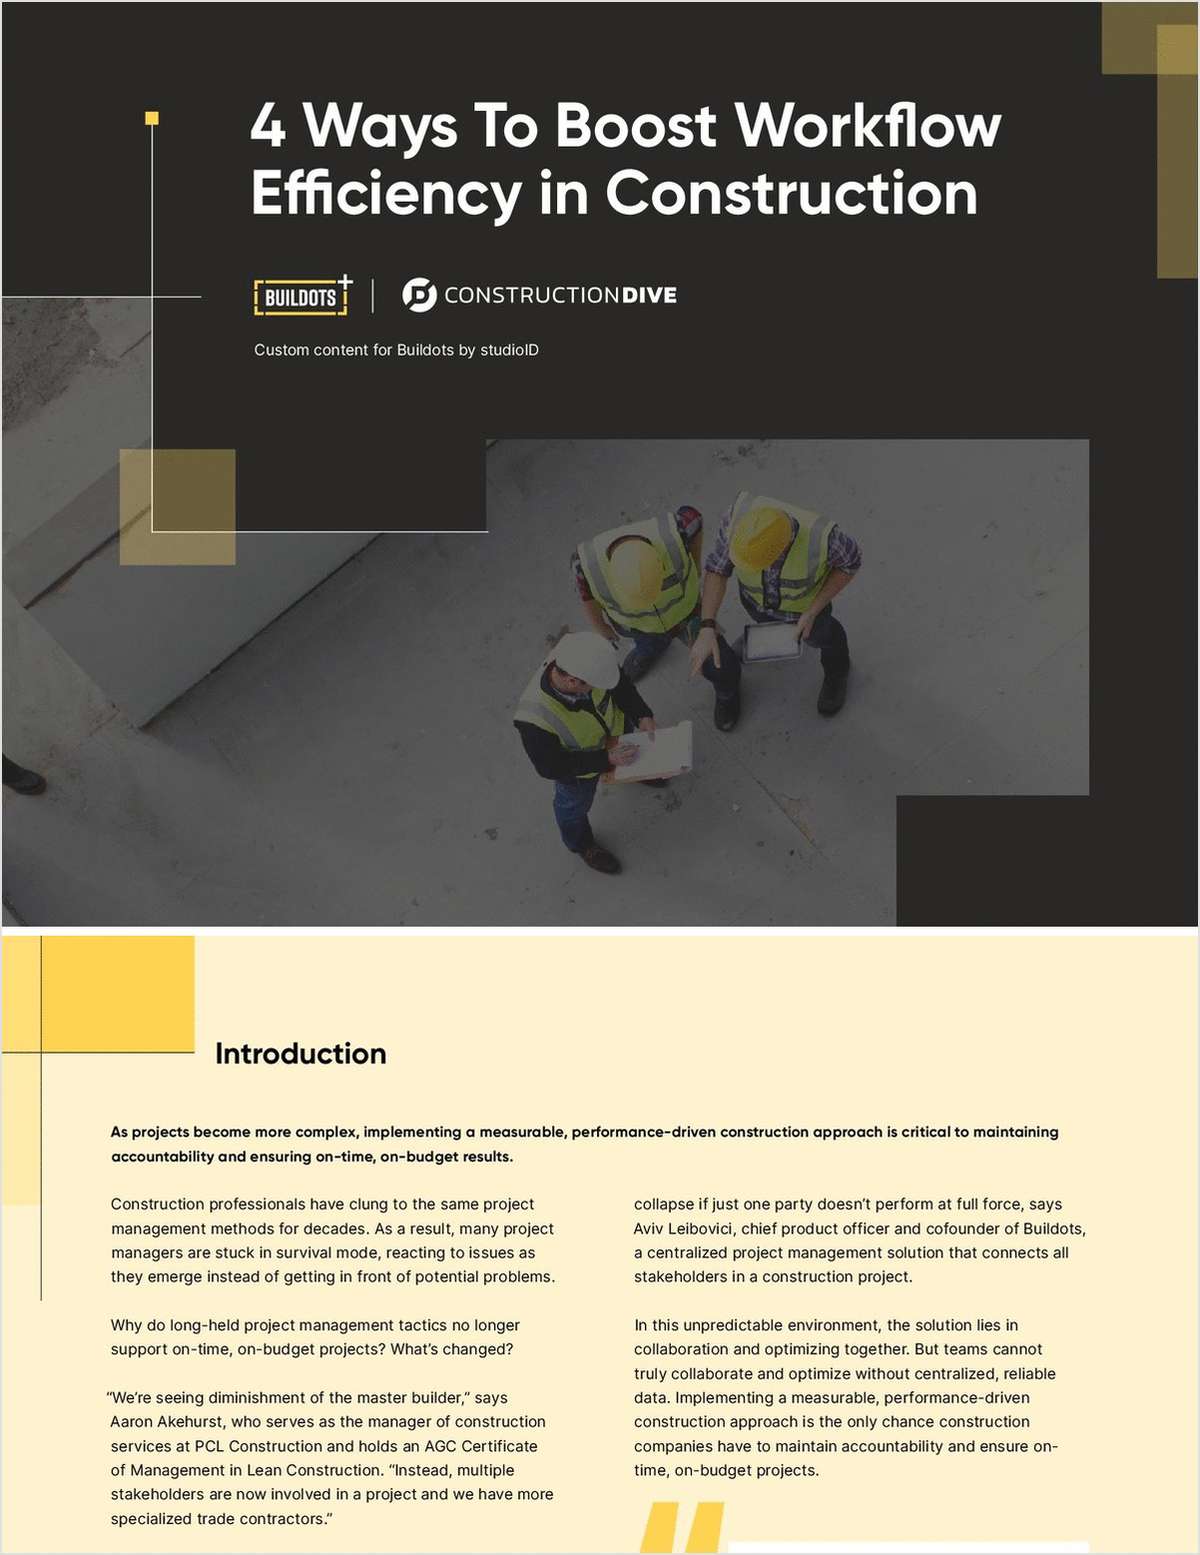 4 Ways to Boost Workflow Efficiency in Construction